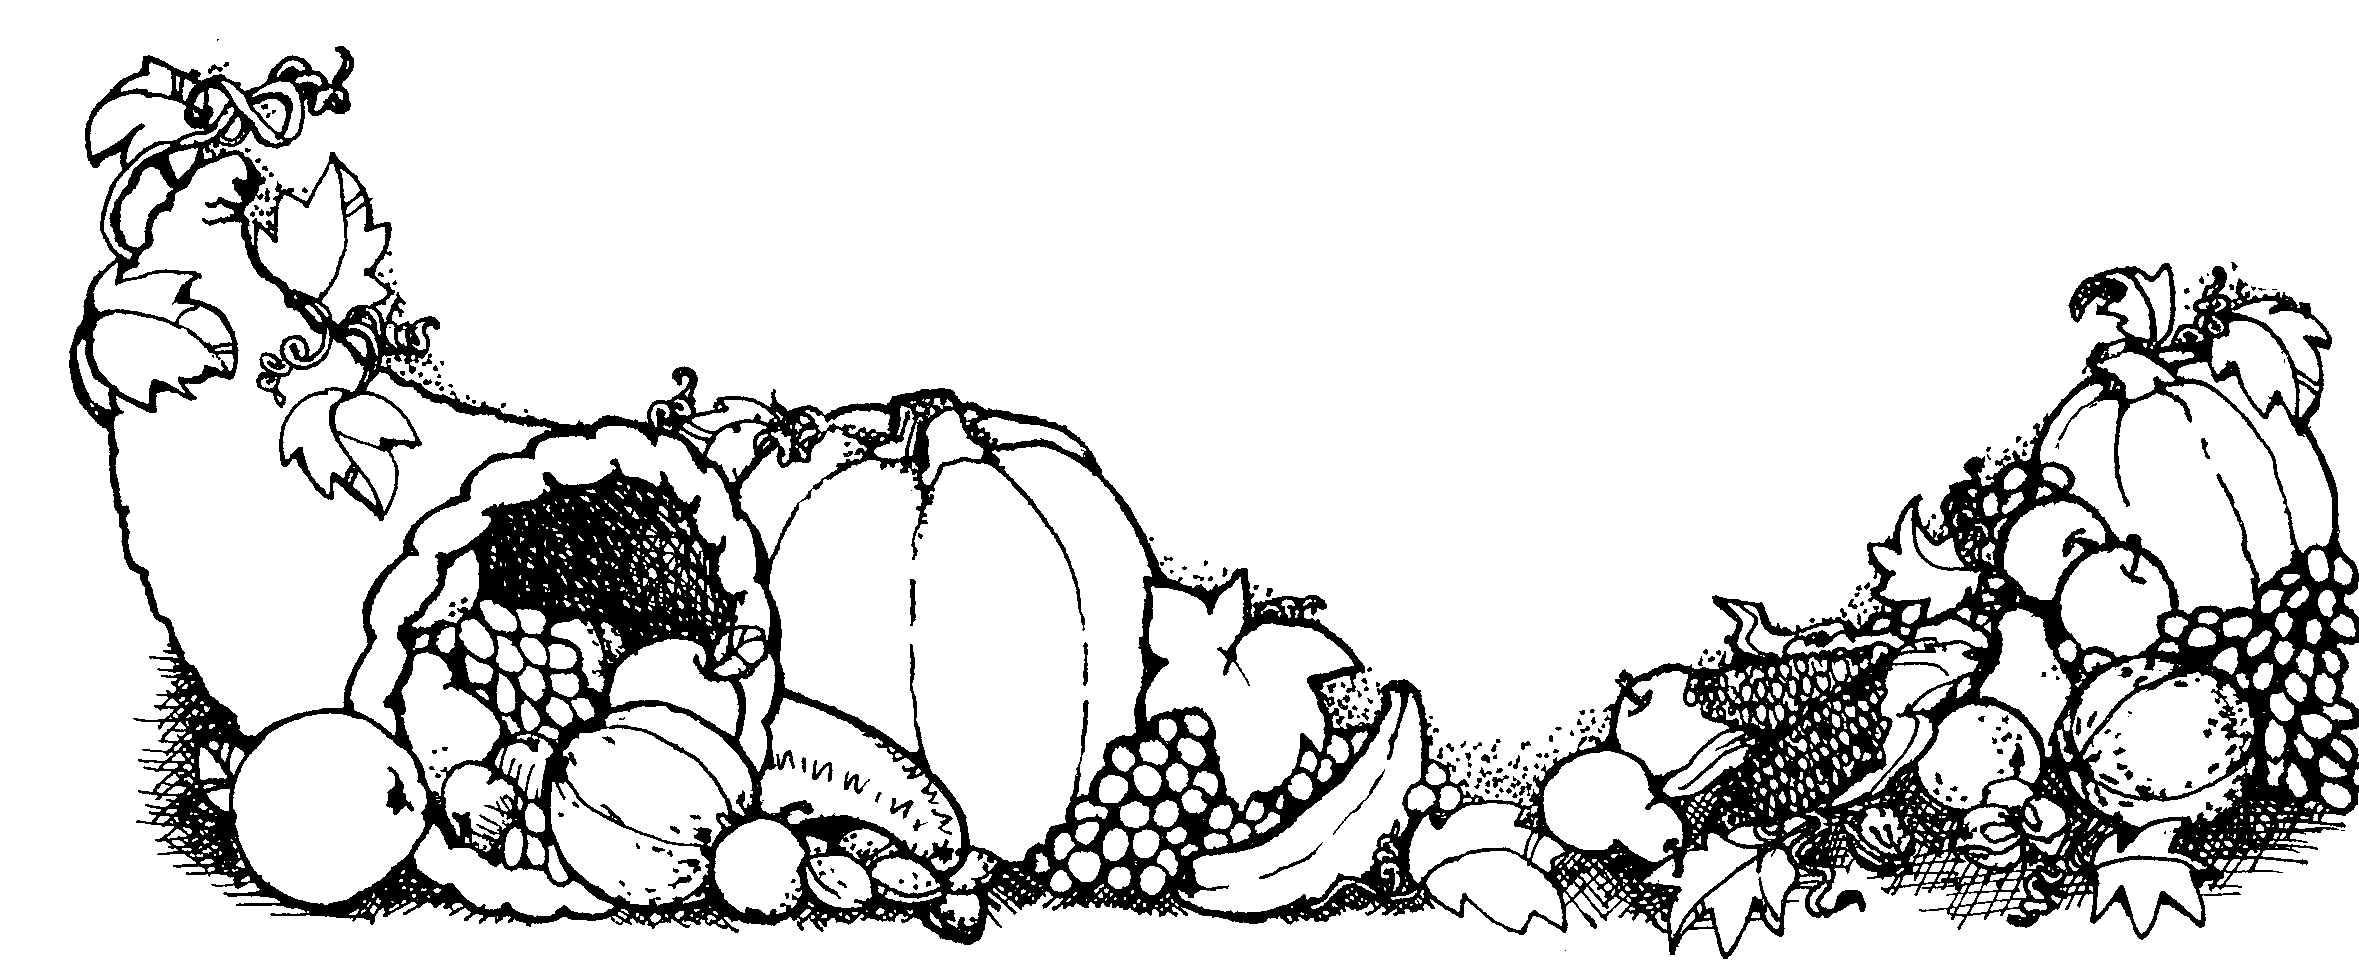 Free Black And White Thanksgiving Images, Download Free Clip.